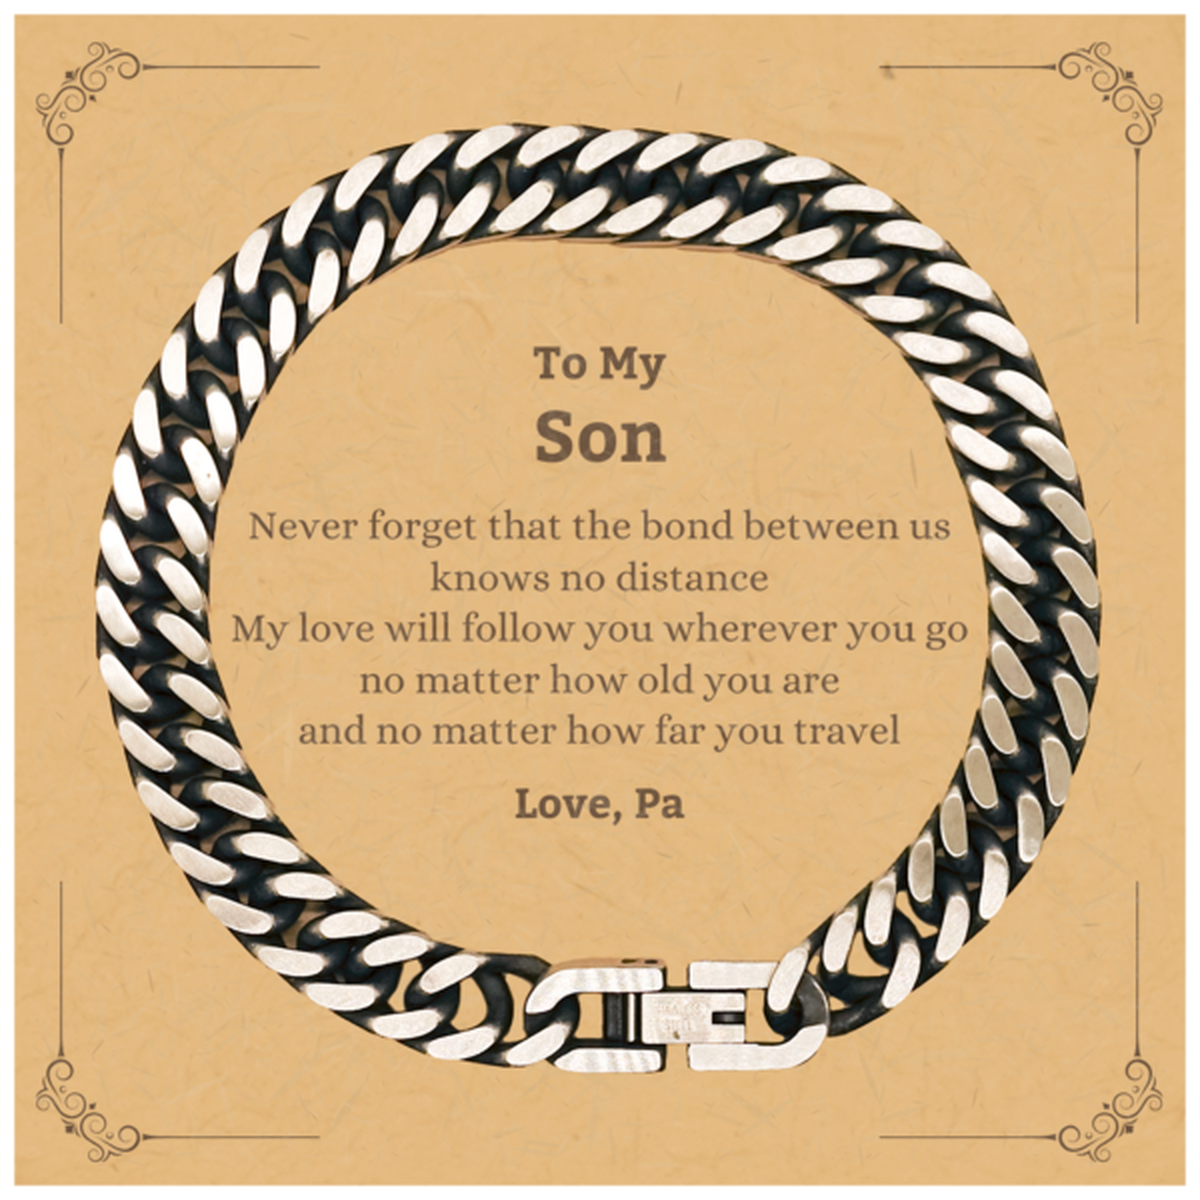 Son Birthday Gifts from Pa, Adjustable Cuban Link Chain Bracelet for Son Christmas Graduation Unique Gifts Son Never forget that the bond between us knows no distance. Love, Pa